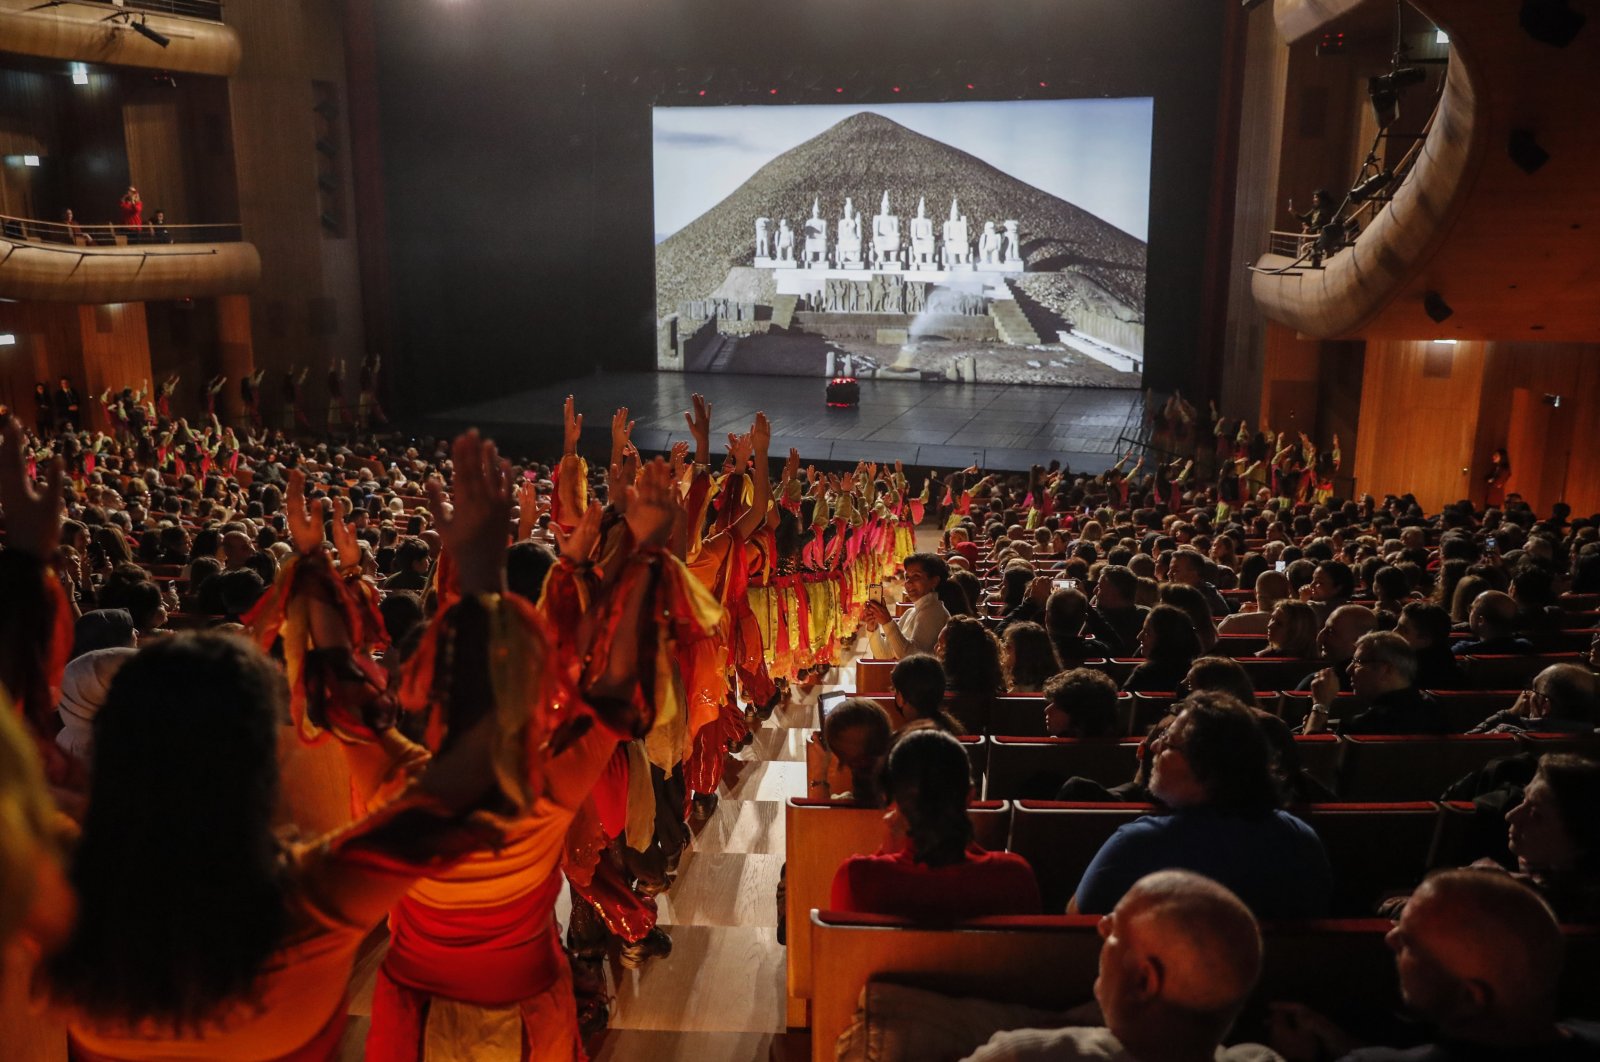 The dance troupe &quot;Fire of Anatolia&quot; during their 24th-anniversary show in the Atatürk Cultural Center, Istanbul, Türkiye, Dec. 24, 2022. (Photo by Betül Tilmaç)